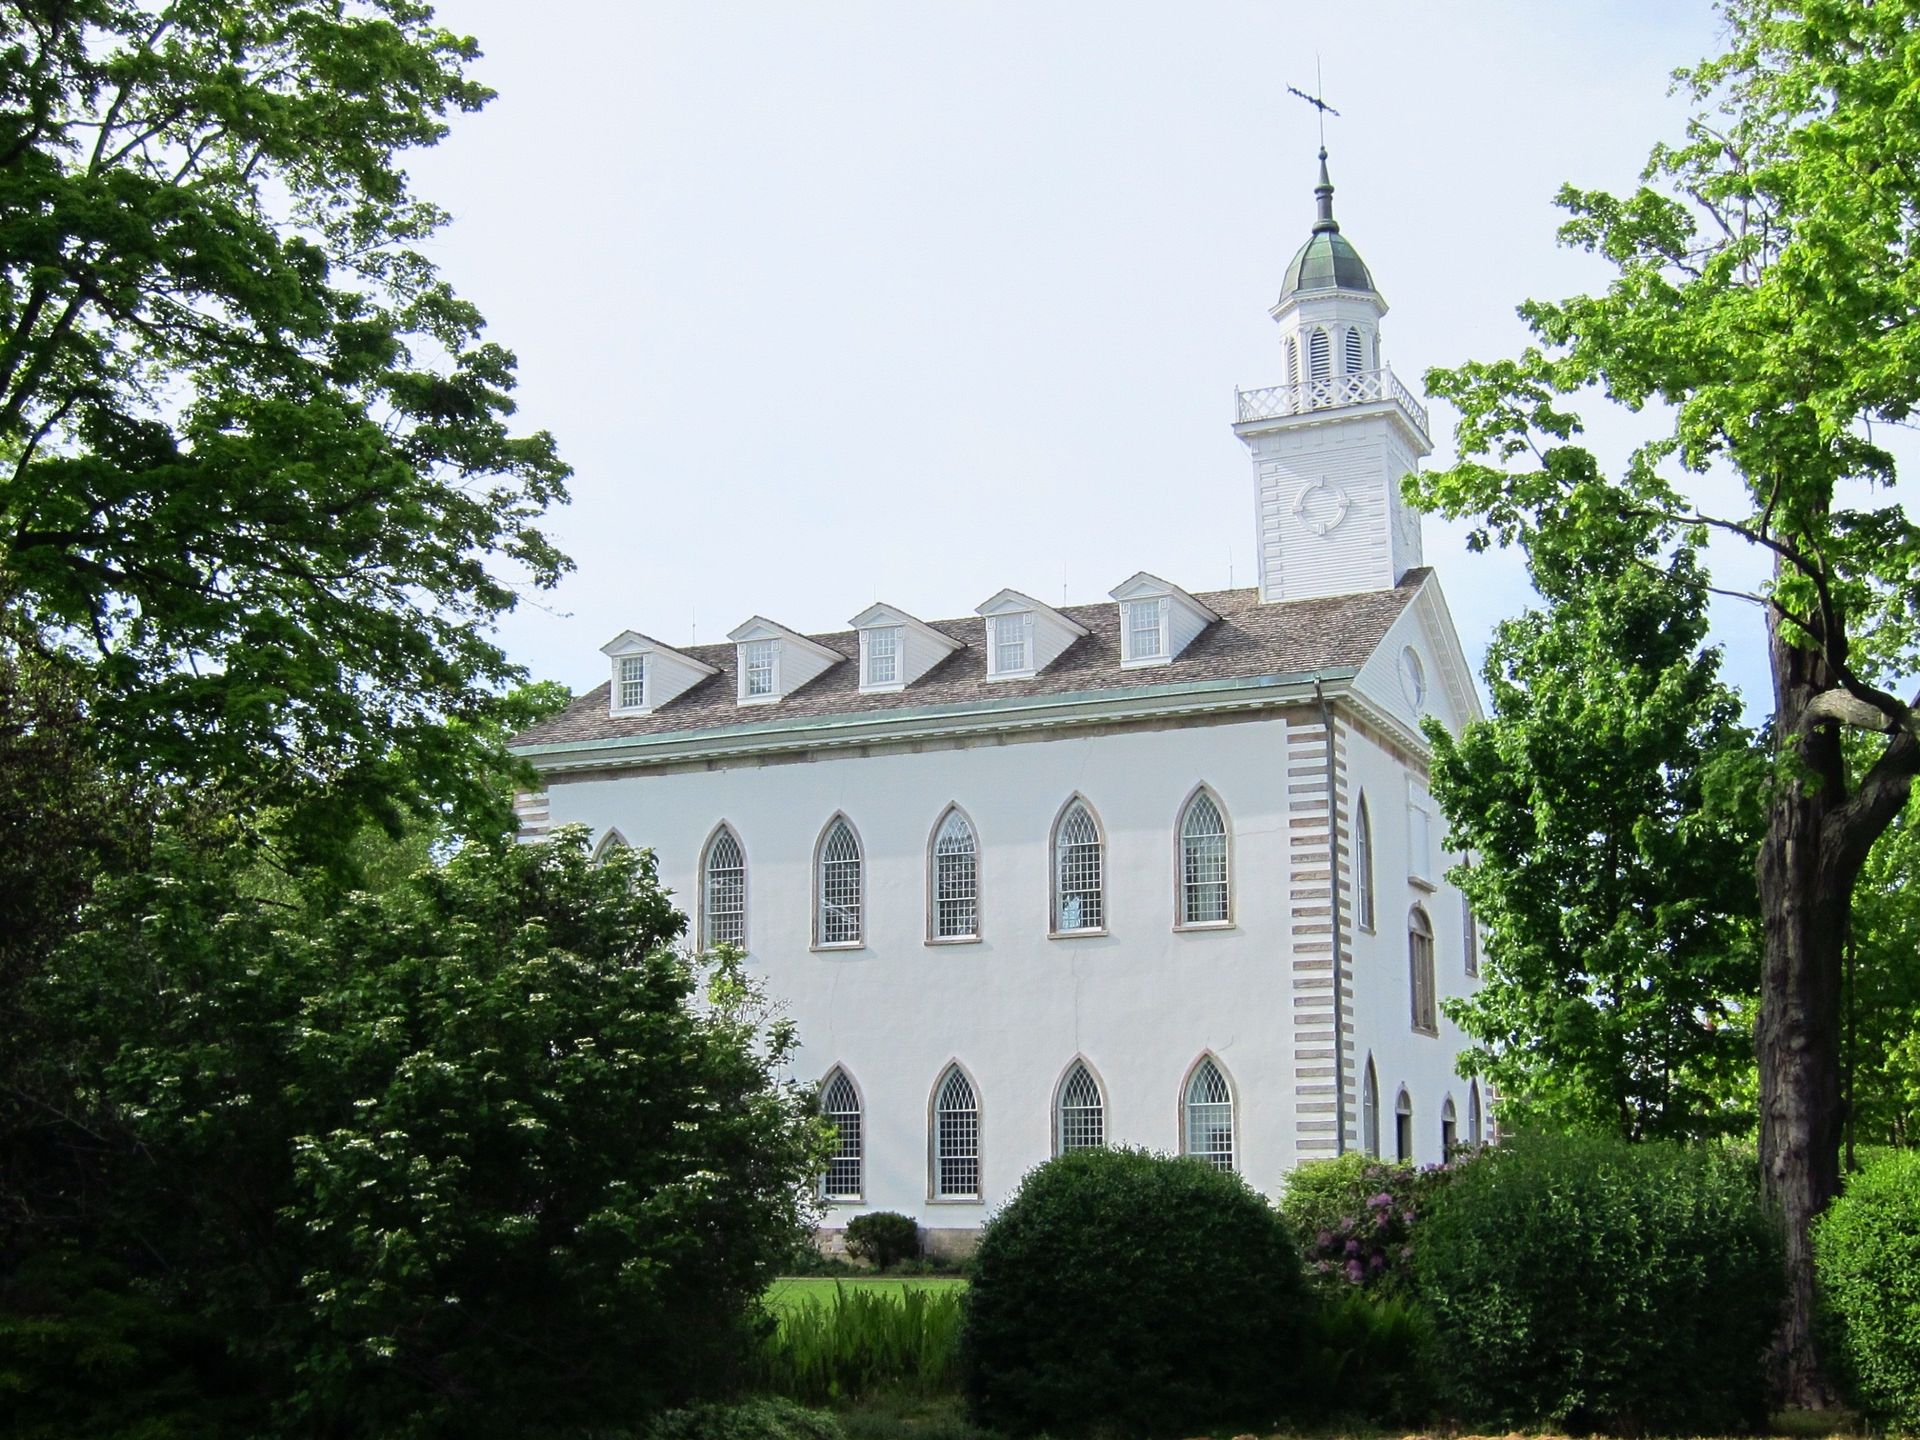 The Kirtland Temple side view, including scenery.